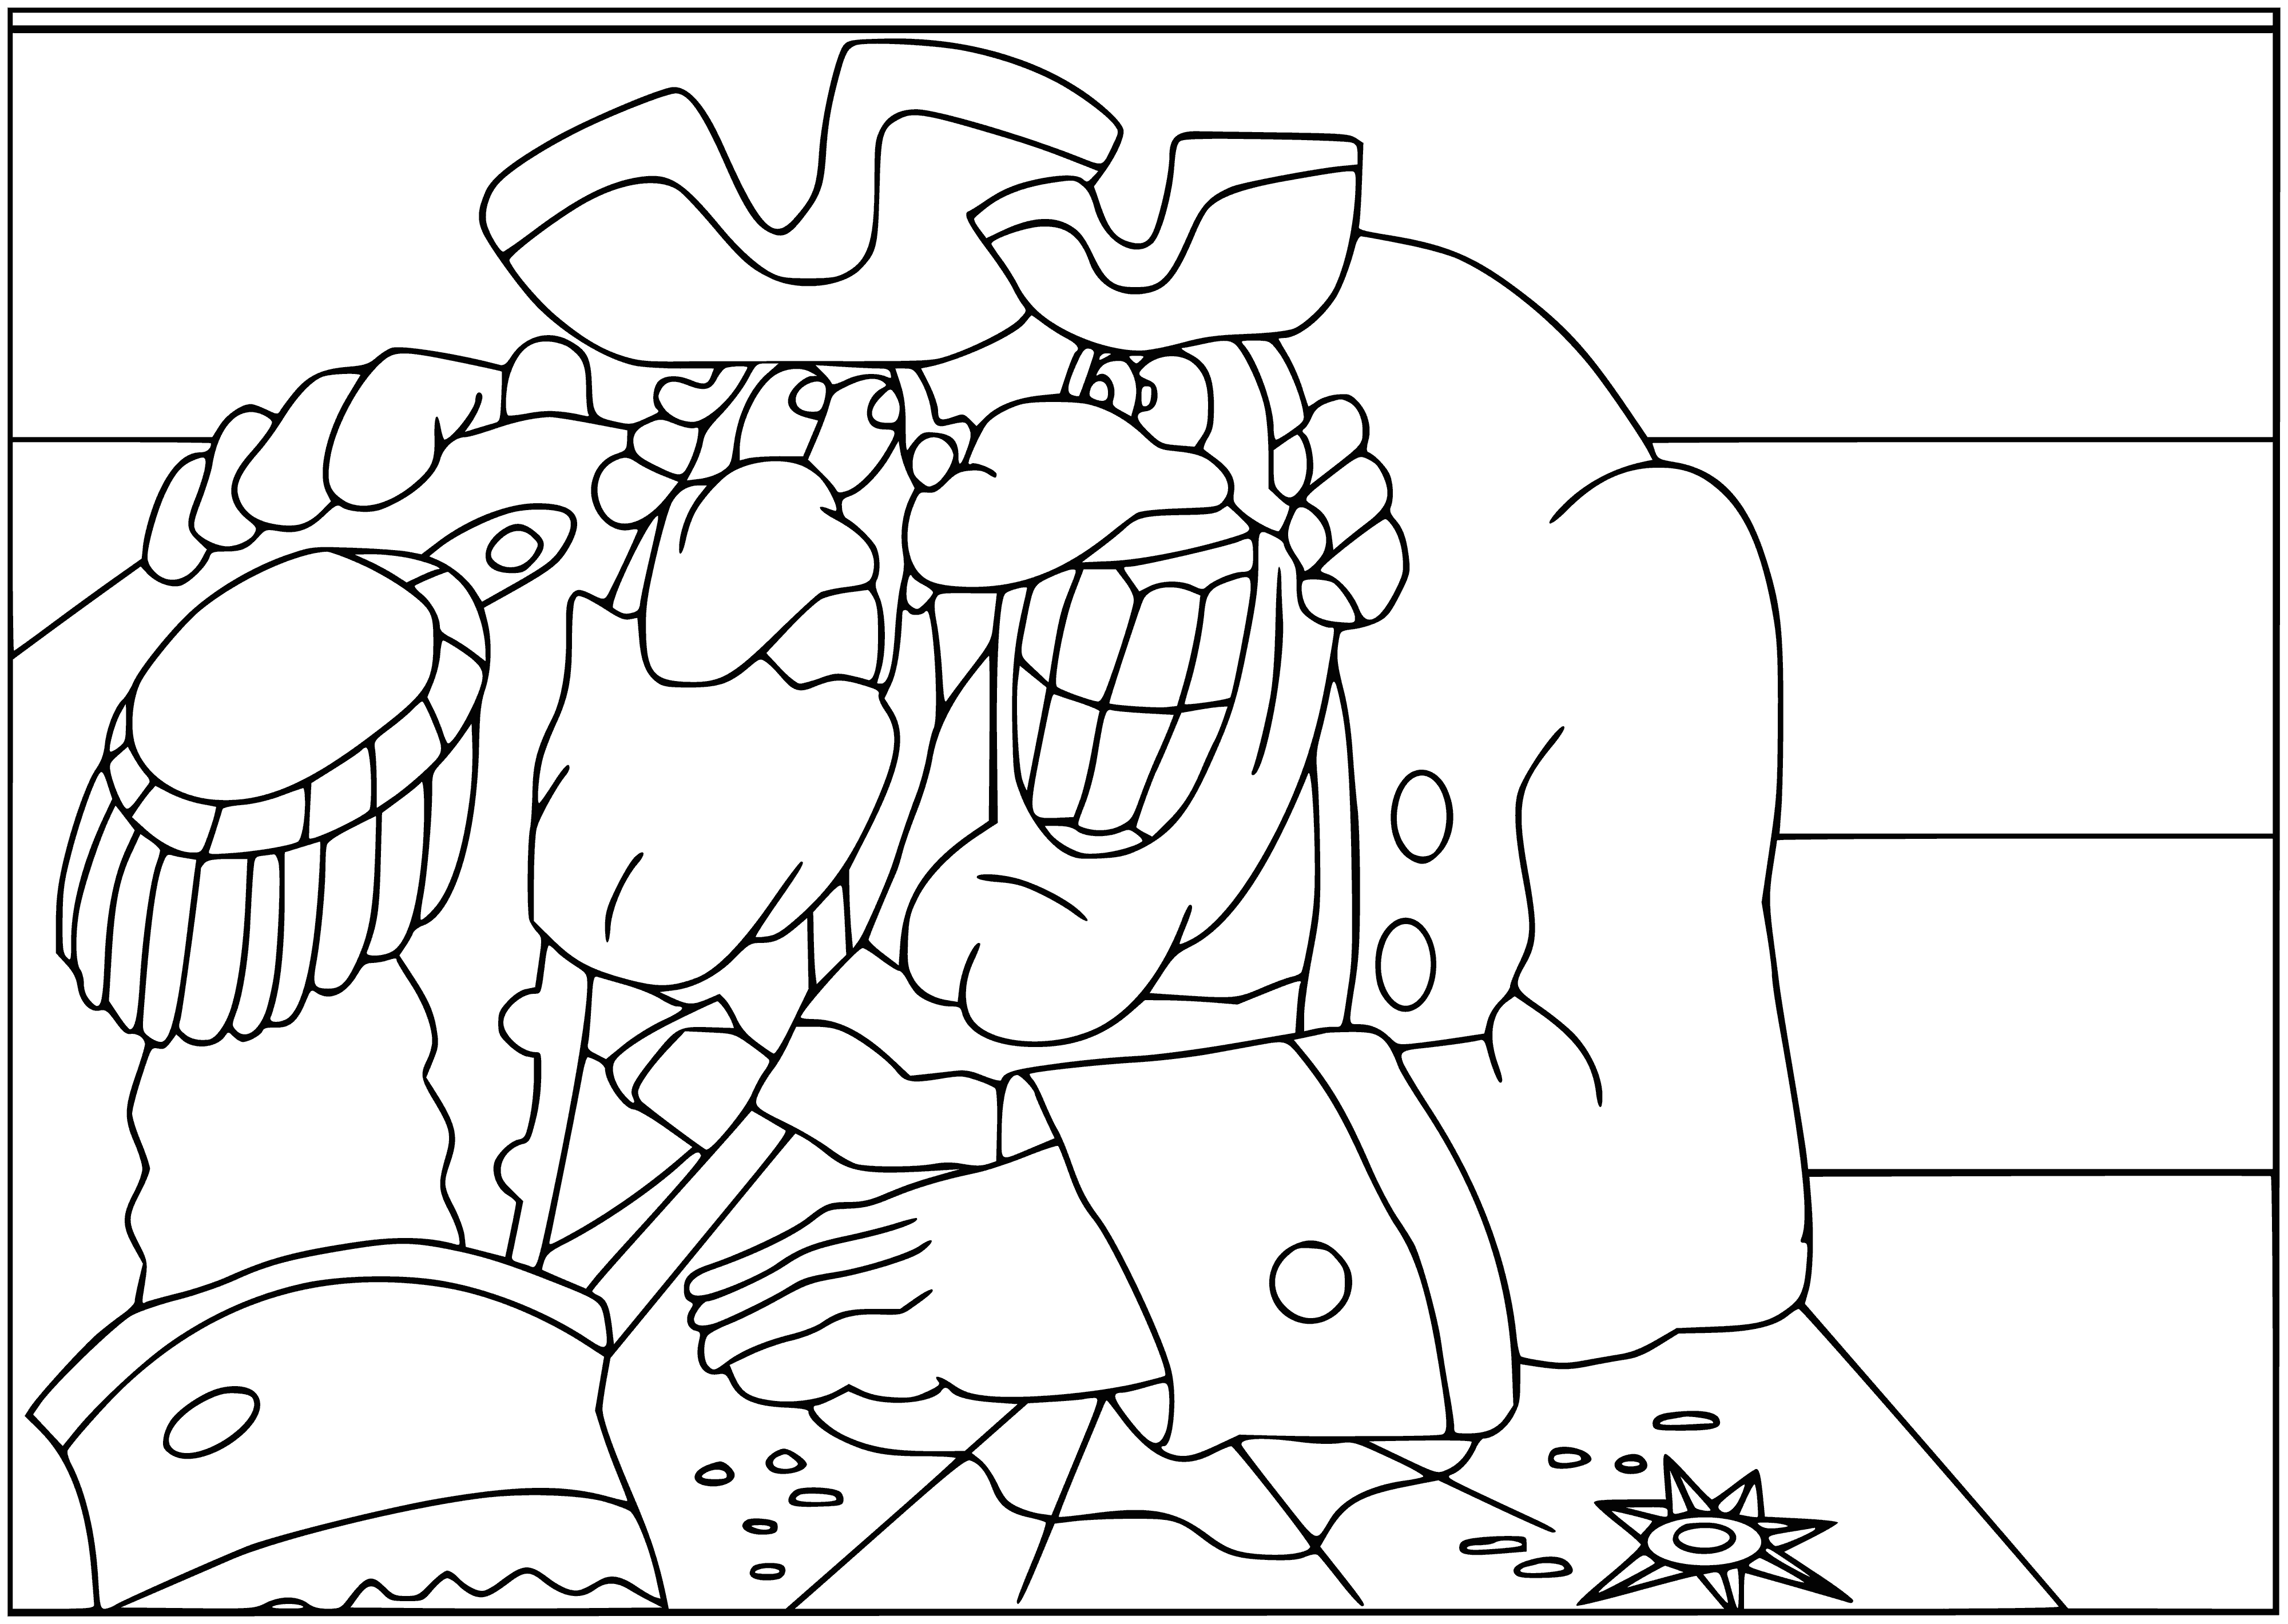 coloring page: Squire, doctor and men studying a treasure map, gesturing and nodding in agreement, planning next move.